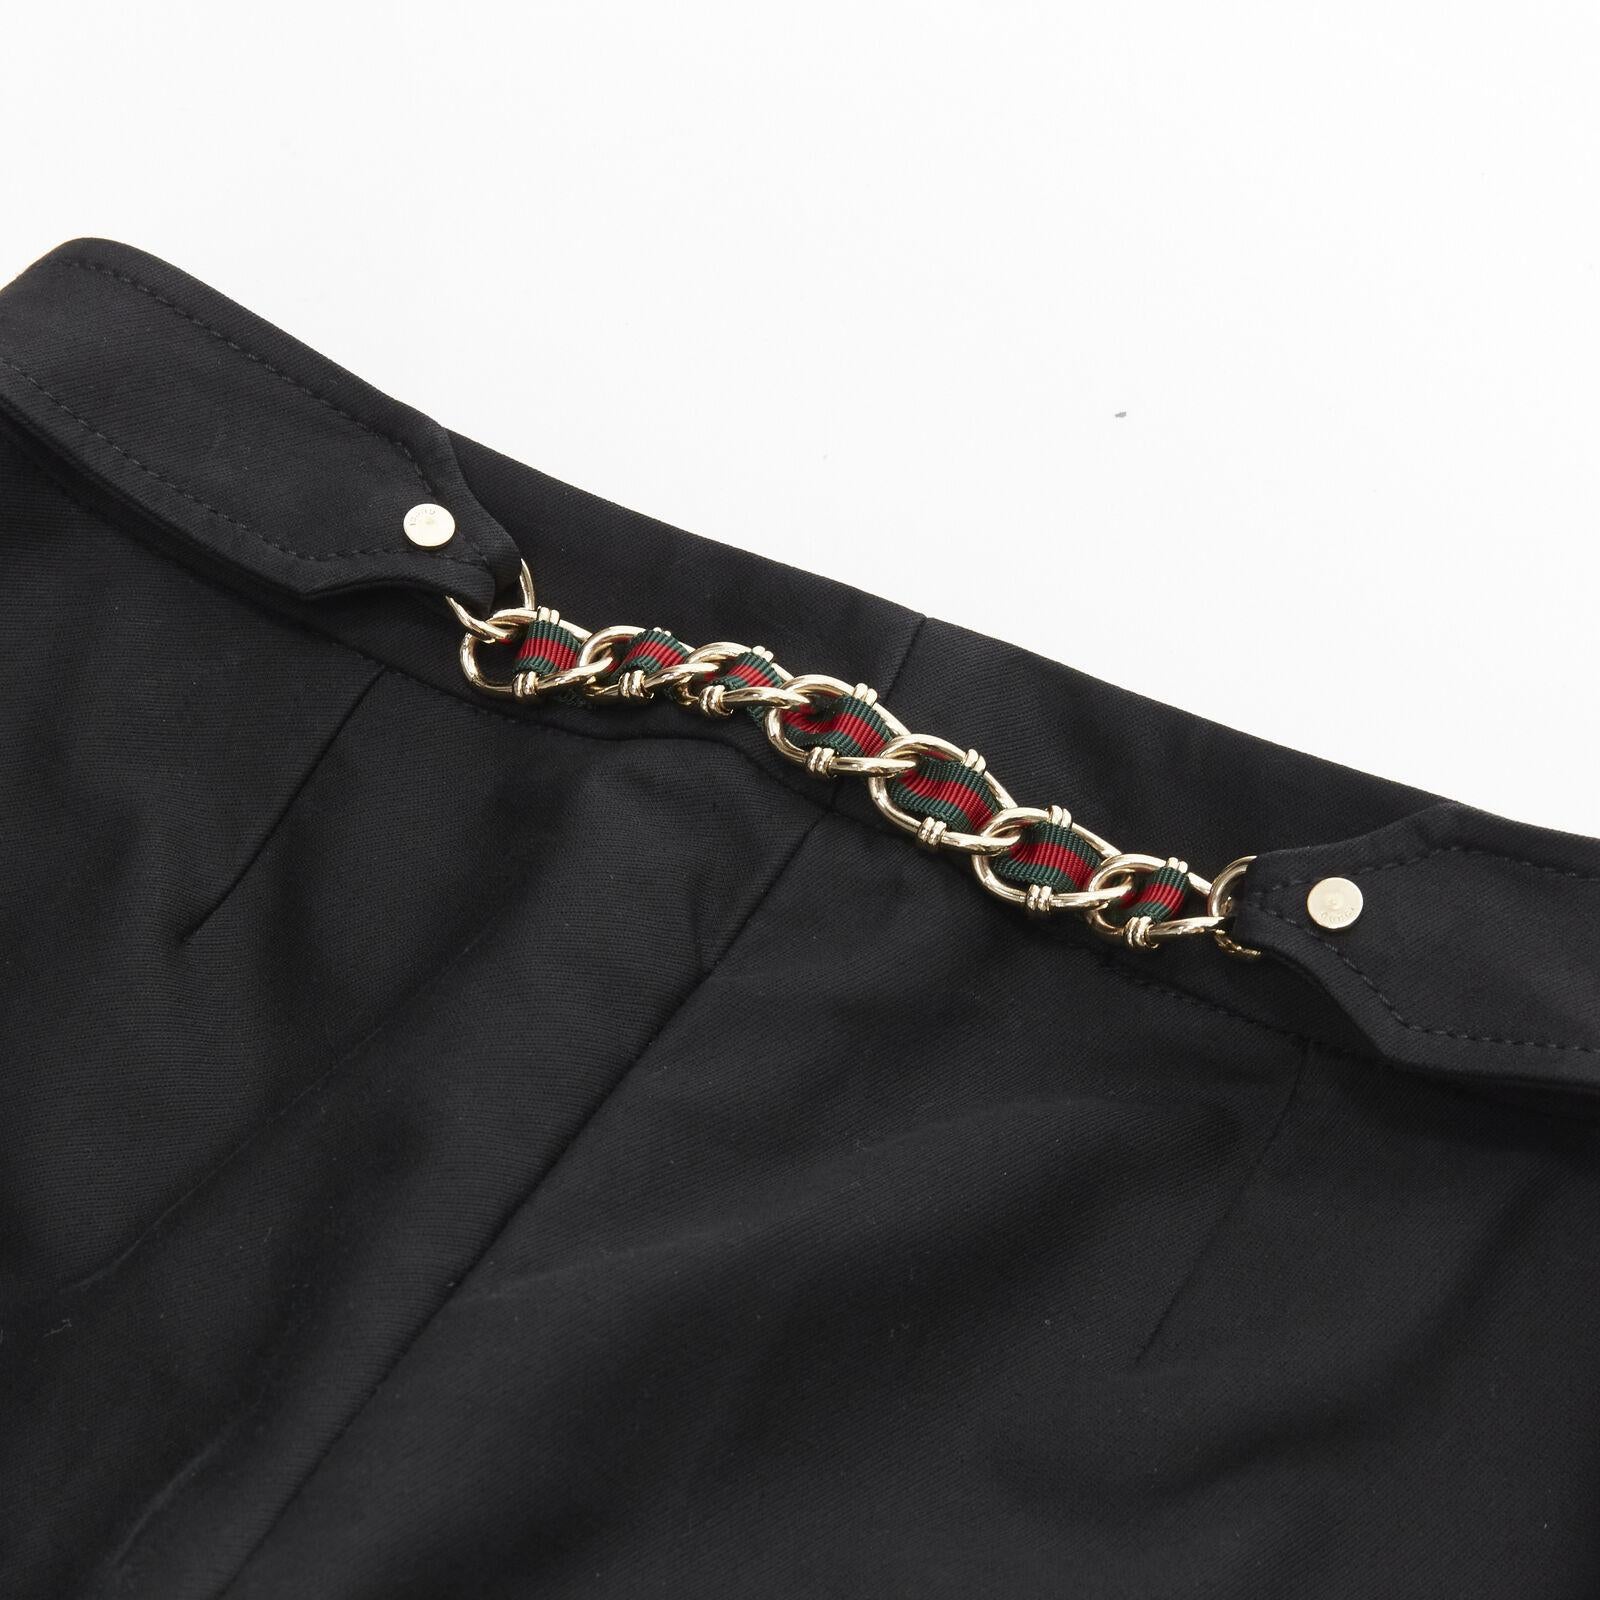 GUCCI black gold web chain trim back kick flared trousers pants IT38 XS
Reference: ANWU/A00433
Brand: Gucci
Designer: Tom Ford
Material: Feels like cotton
Color: Black
Pattern: Solid
Closure: Zip Fly
Lining: Unlined
Extra Details: Chain trim